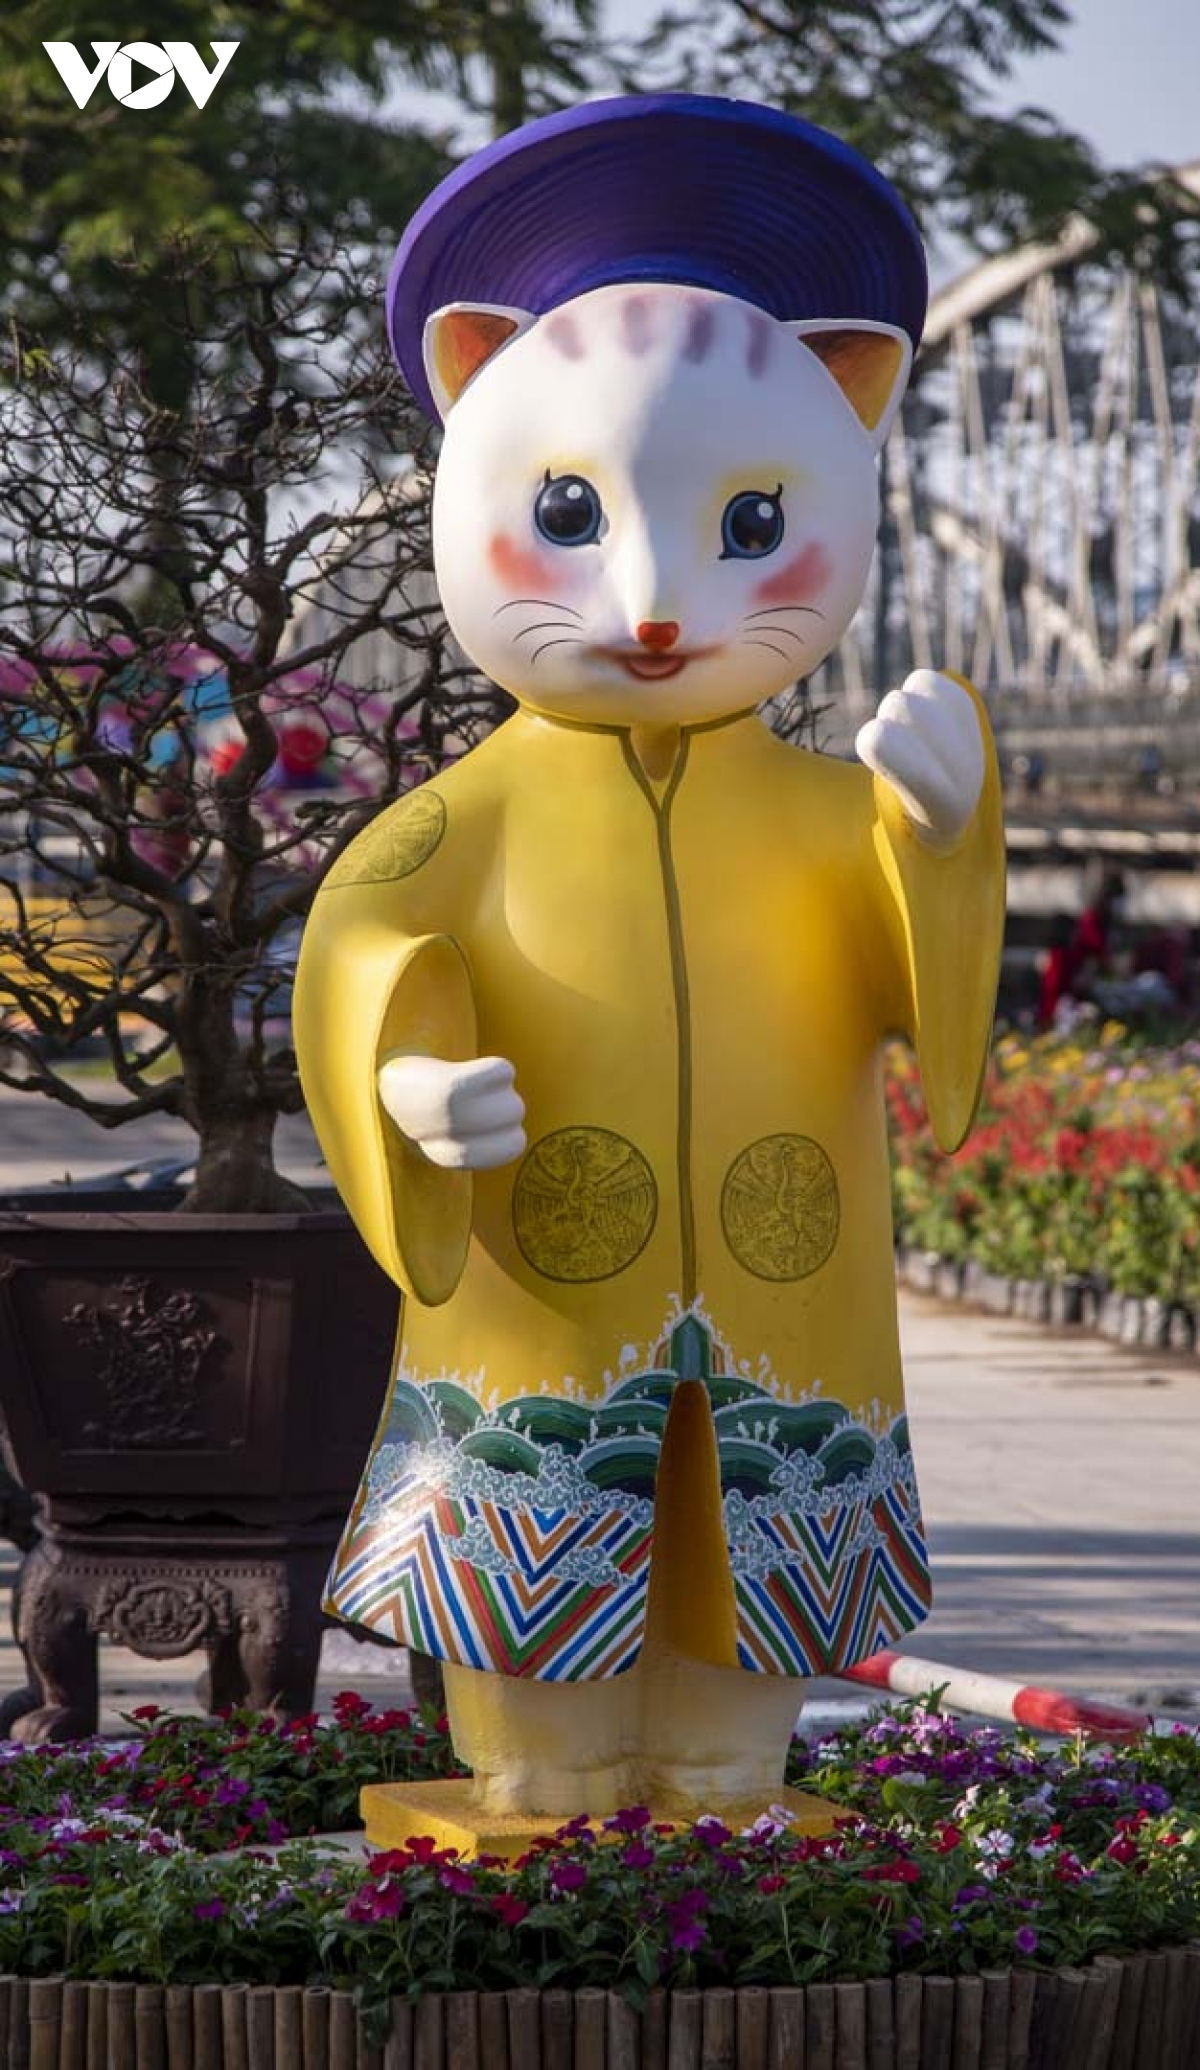 cat-shaped statues in thua thien-hue province celebrate tet festival picture 6